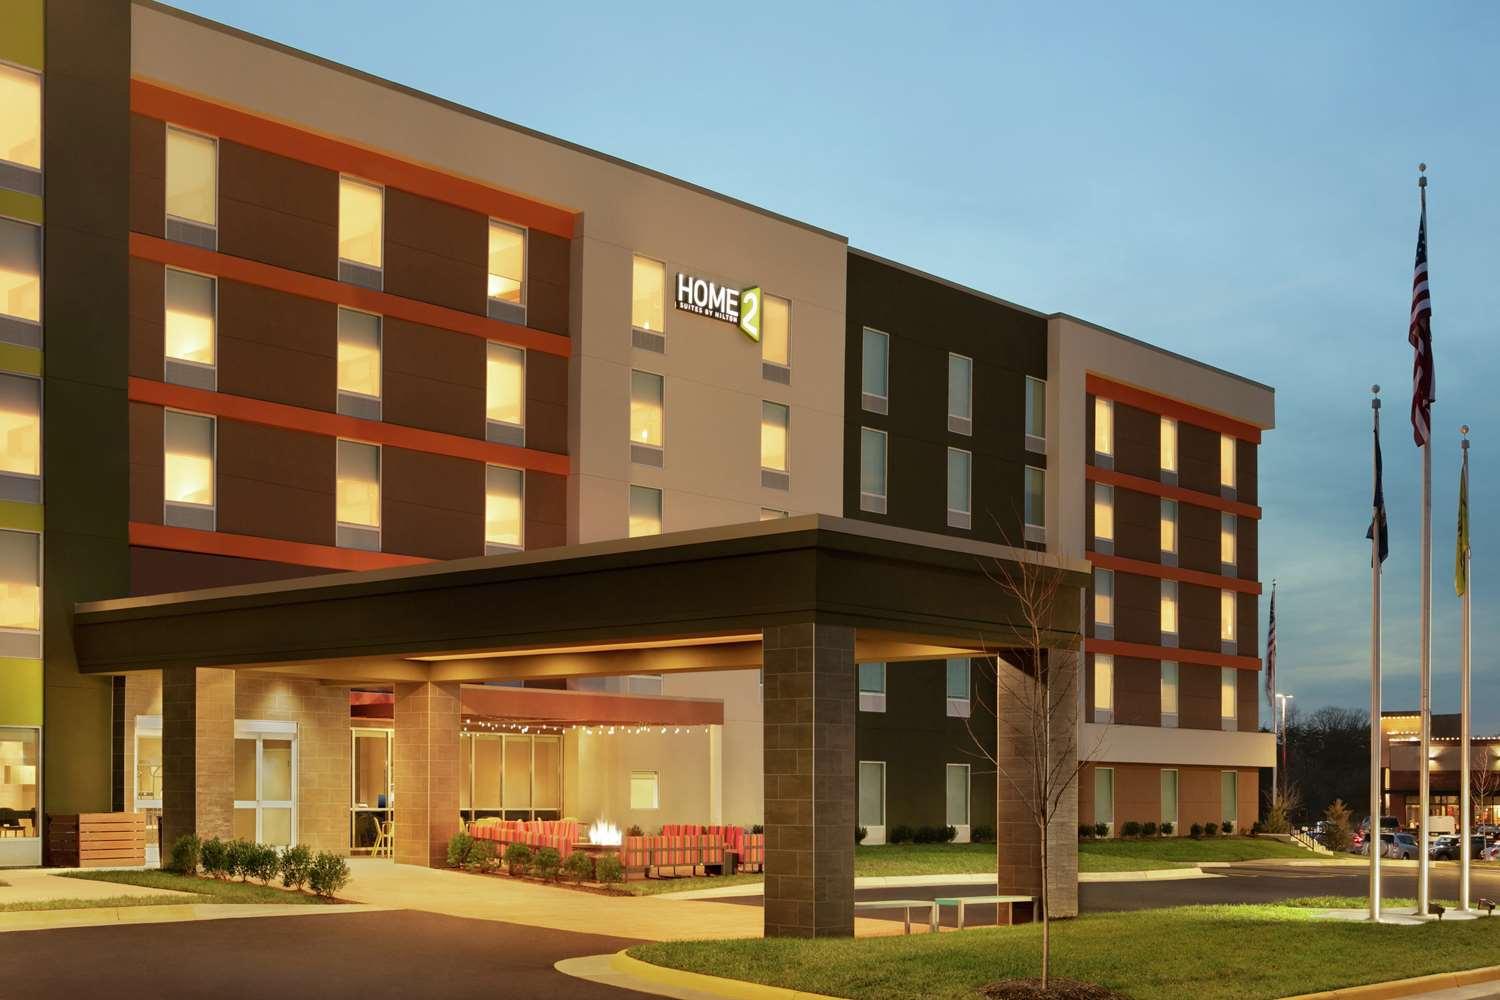 Home2 Suites by Hilton Chantilly Dulles Airport in Chantilly, VA